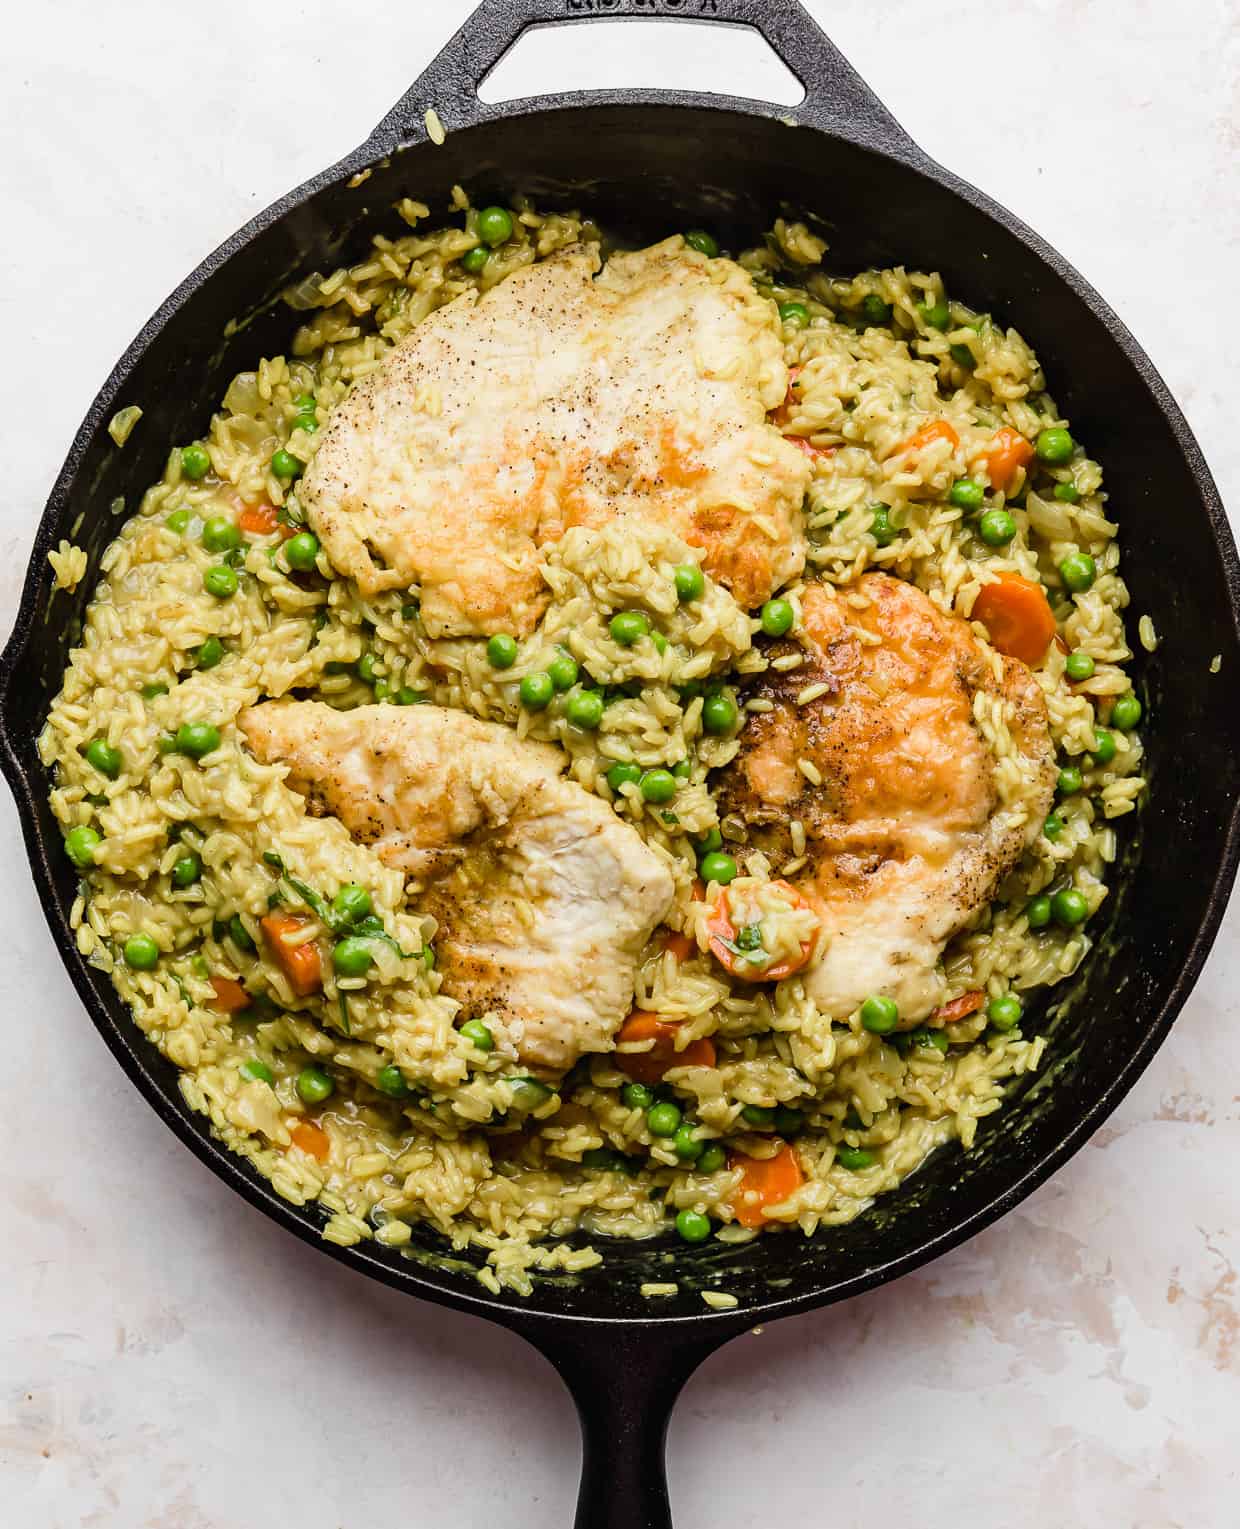 Curry Chicken Rice and Peas and carrots in a black skillet on a white background.